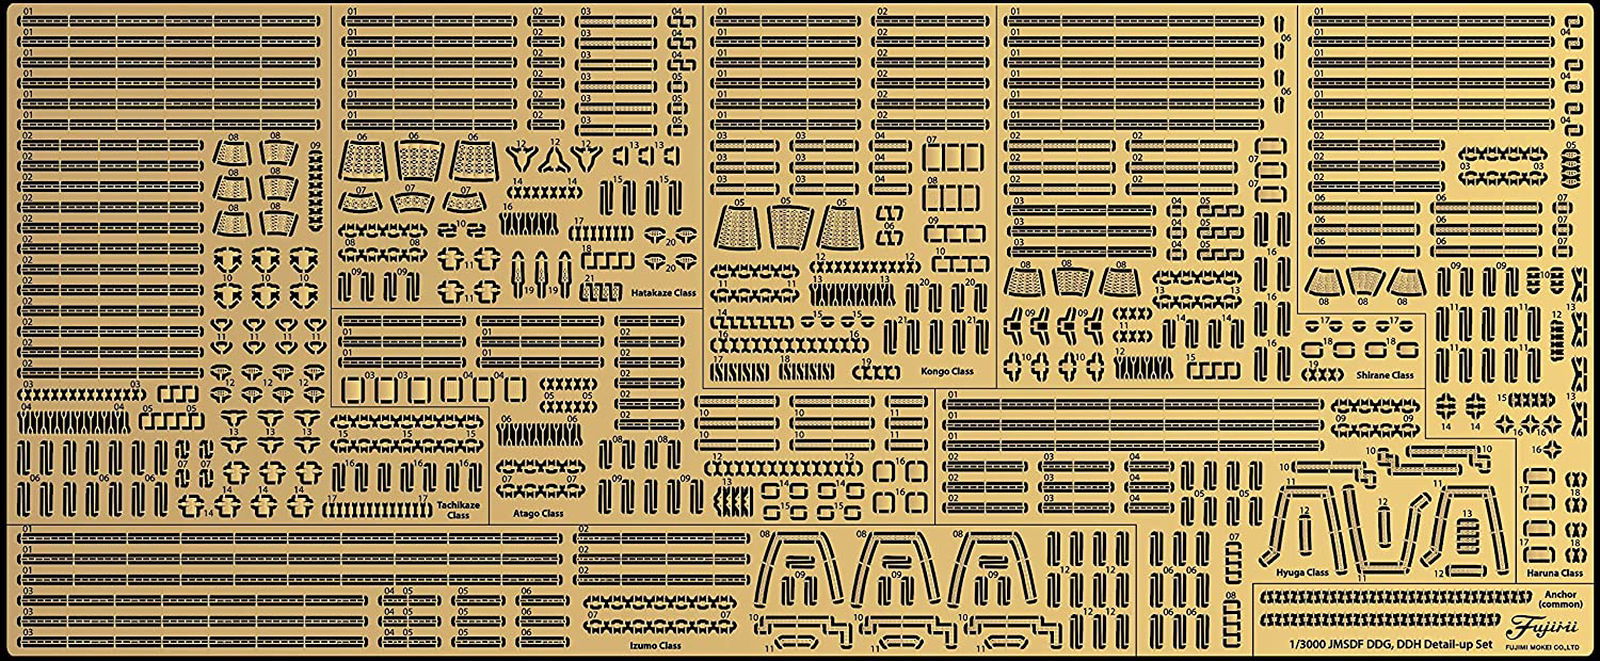 Fujimi Genuine Photo-Etched Parts for JMSDF Helicopter Destroyer, DDH/G - BanzaiHobby